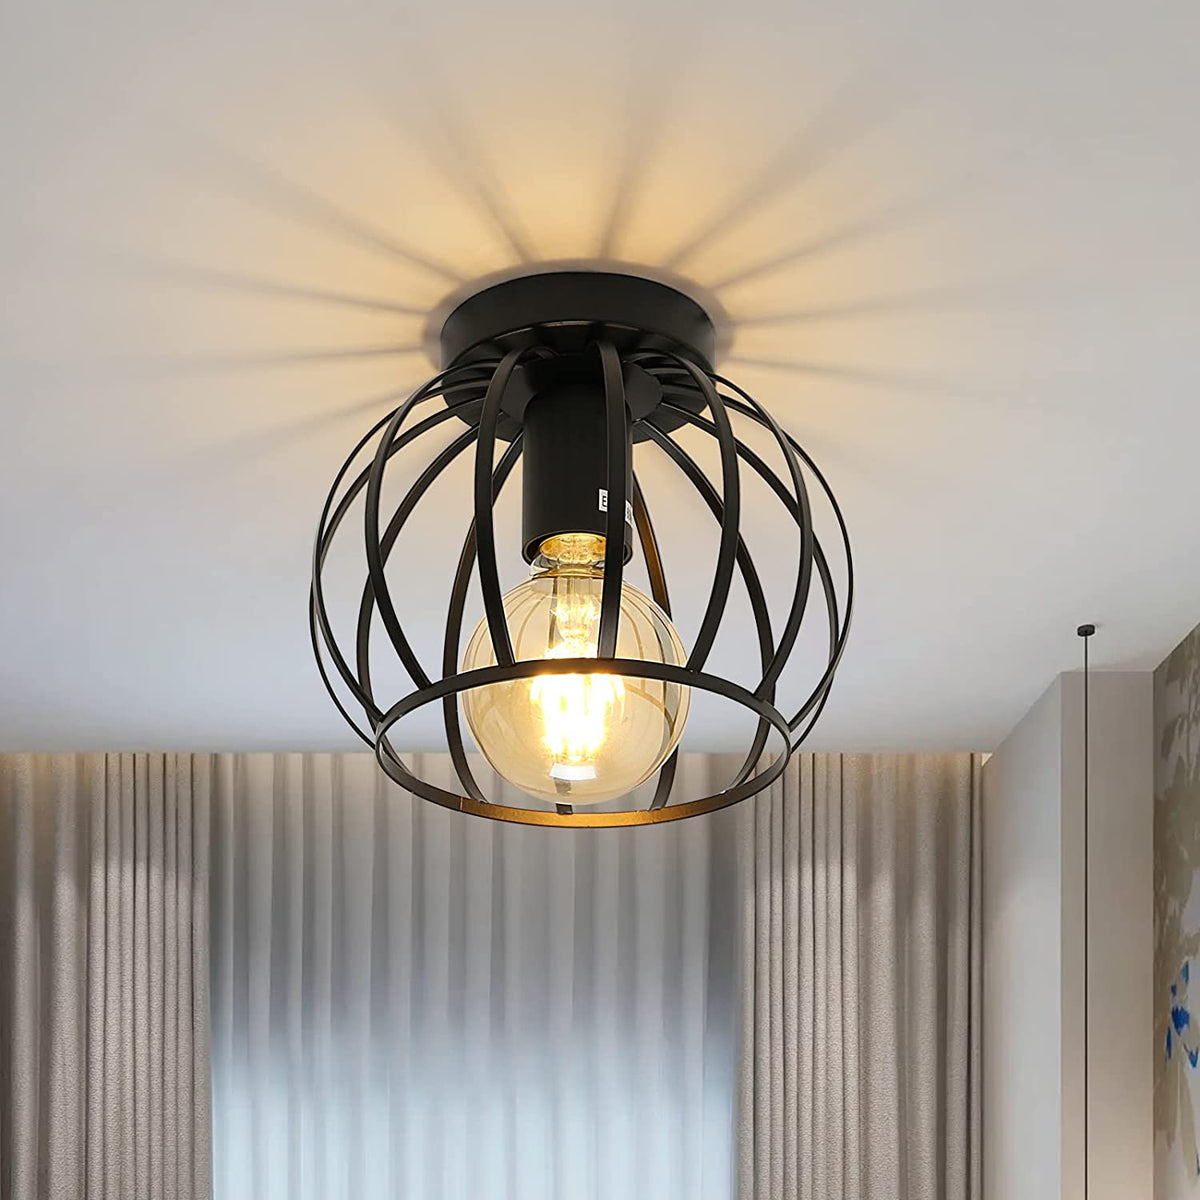 Black Semi Flush Mount Ceiling Light Fixture Metal Cage Ceiling Lampshade with E27 Holder for Living Room Kitchen Bedroom Hallway Courtyard